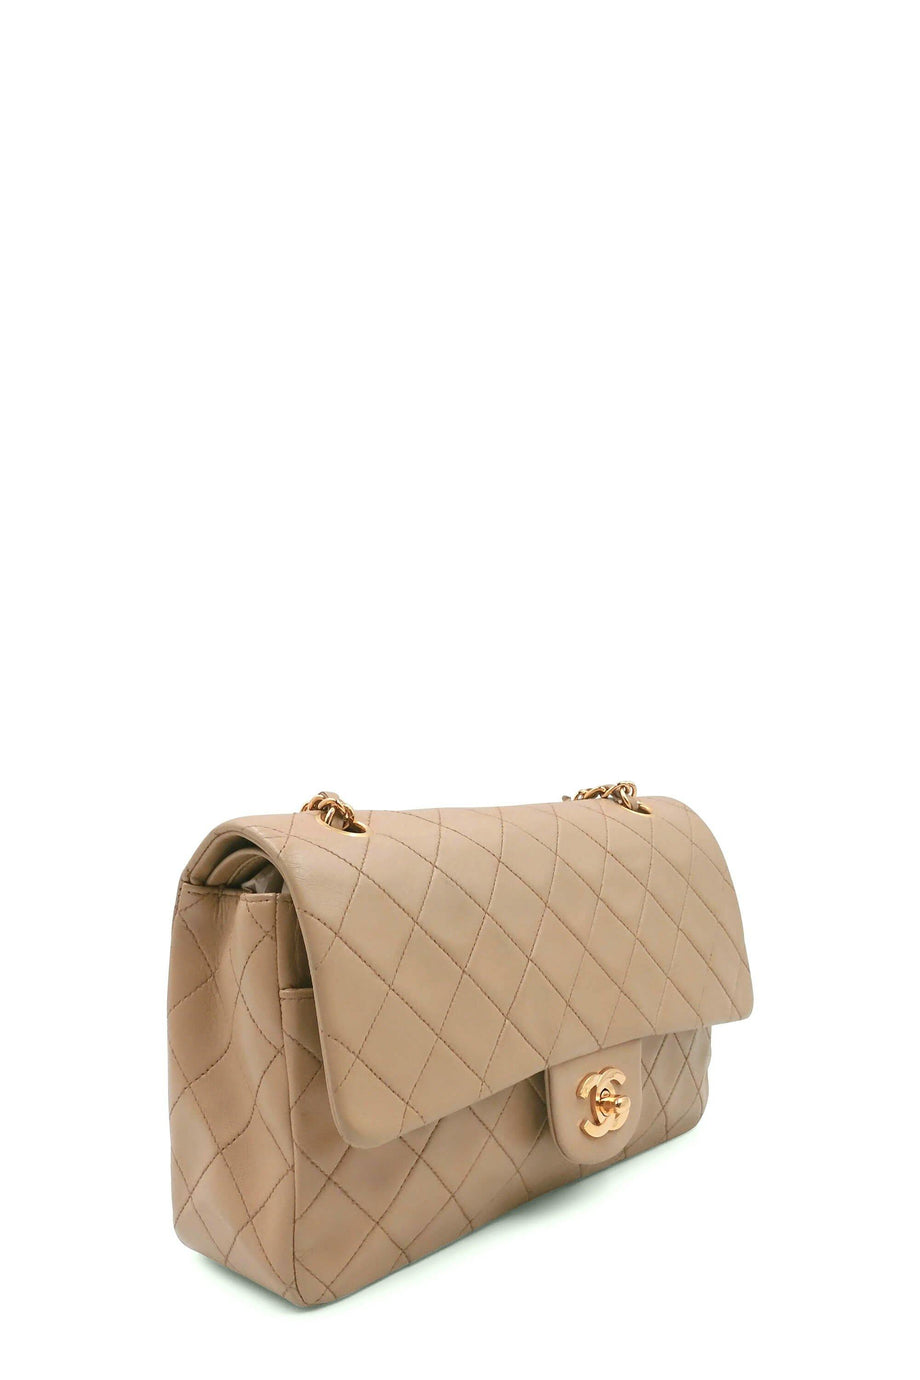 Buy Authentic, Preloved Chanel Vintage Quilted Lambskin Medium Classic Flap  Bag Beige with Gold Hardware Beige Bags from Second Edit by Style Theory